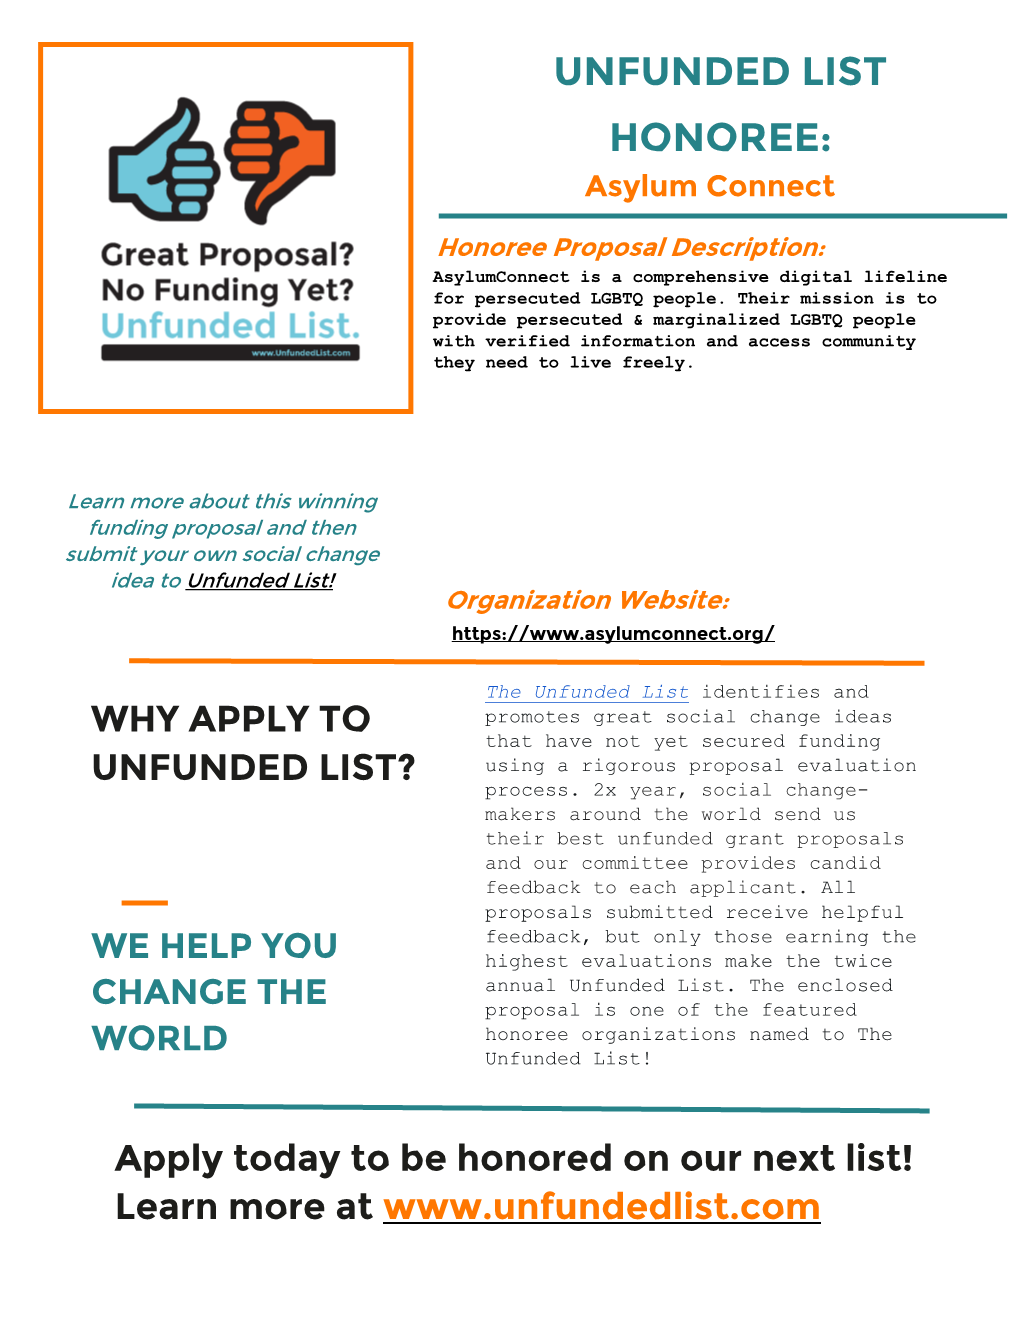 UNFUNDED LIST HONOREE: Asylum Connect